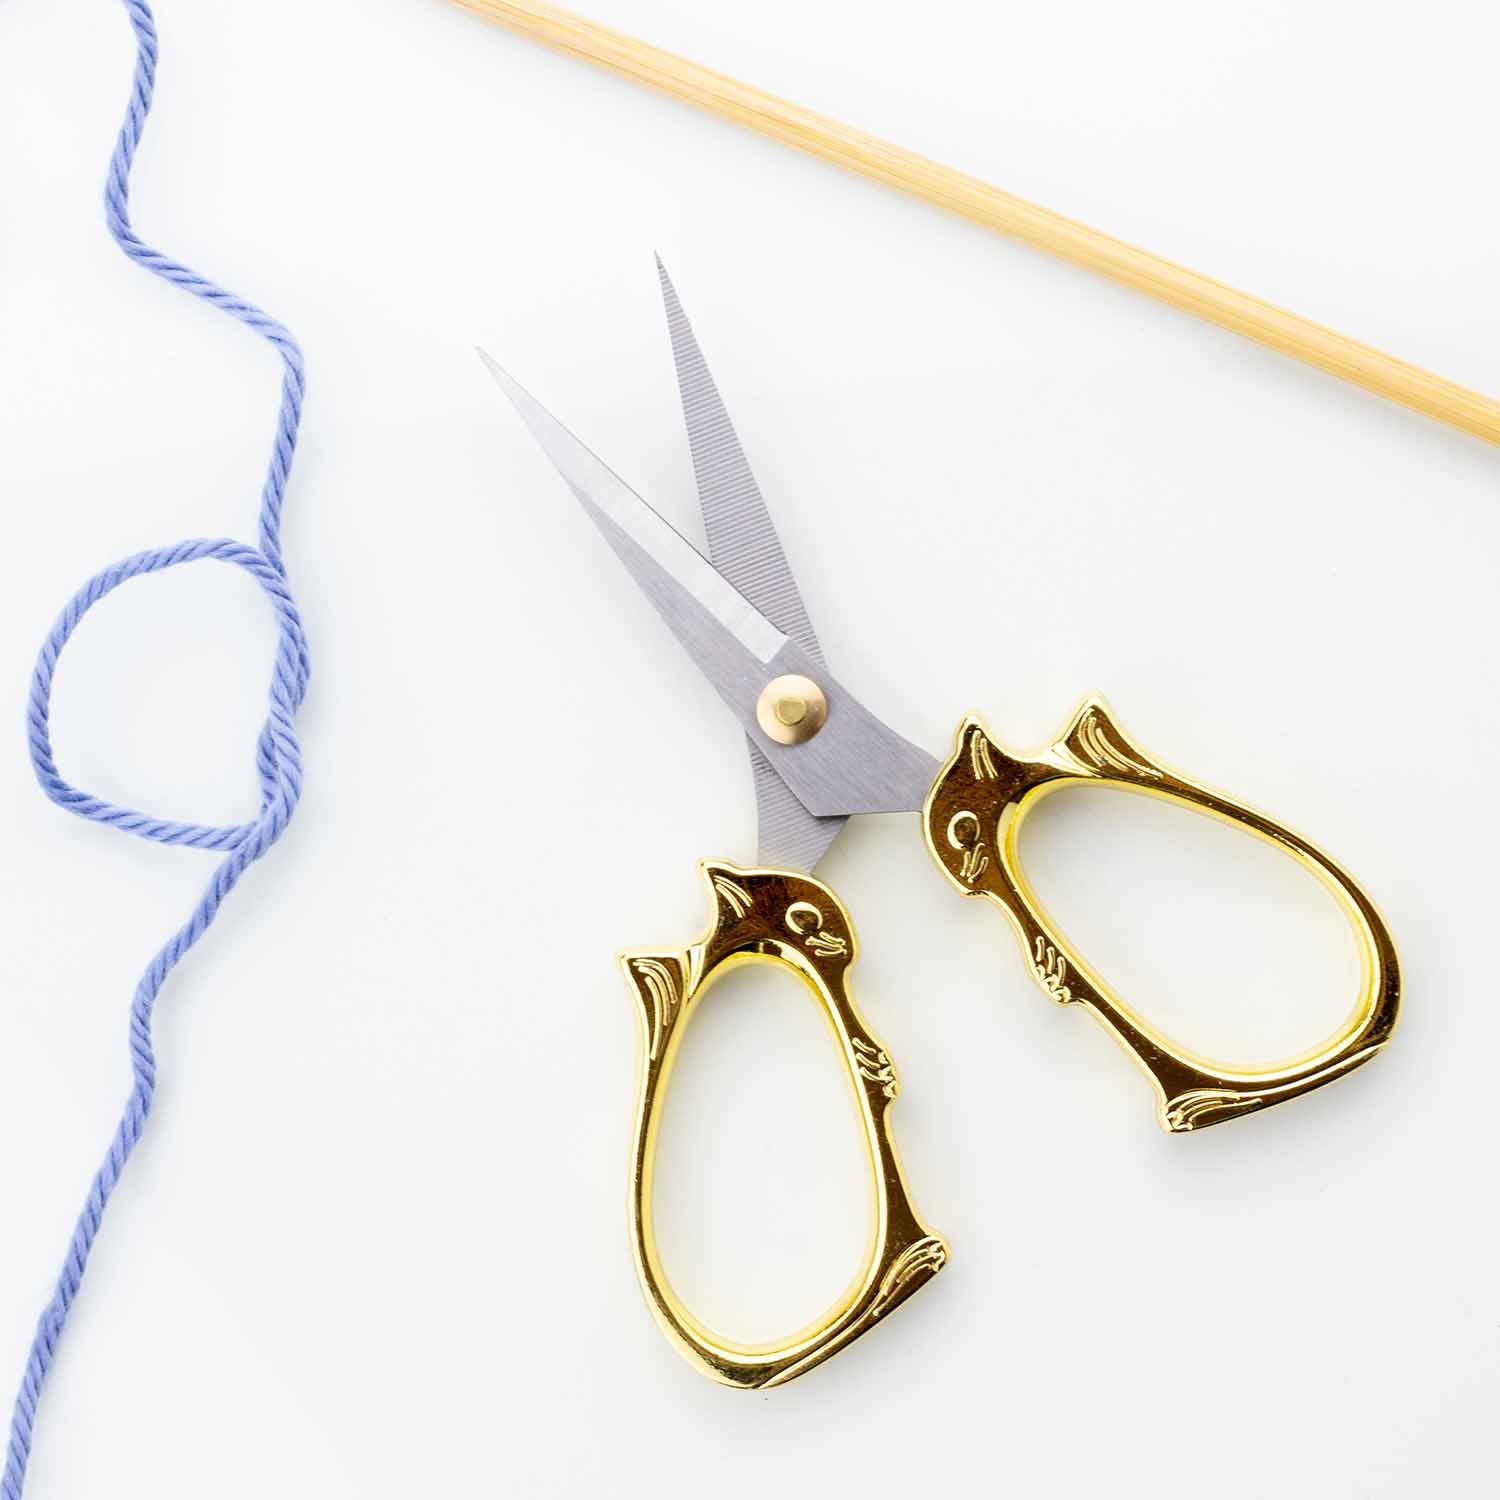 Embroidery Scissors – Modern Daily Knitting